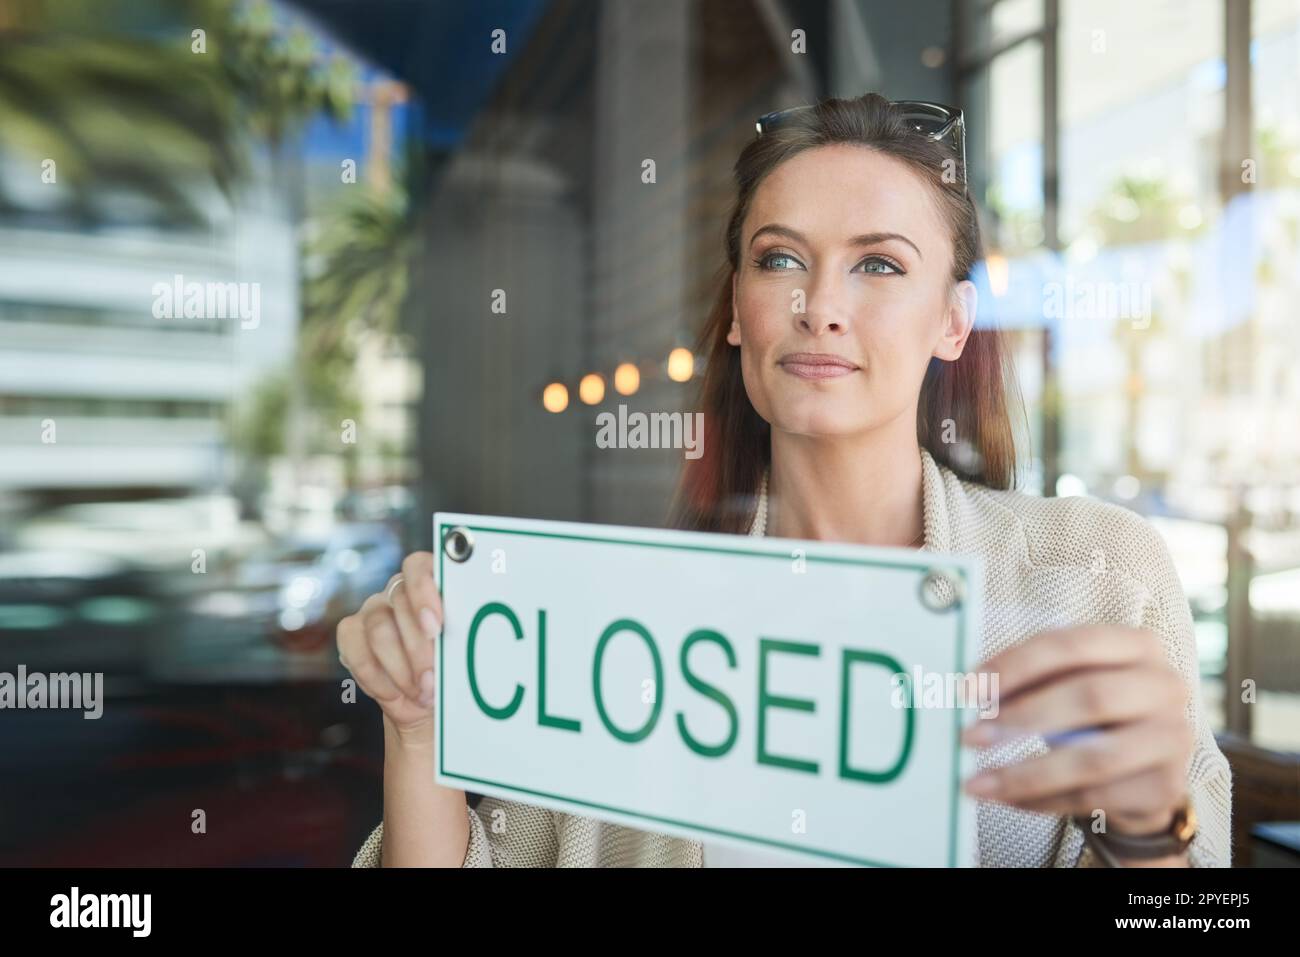 Its closing time. a young entrepreneur holding a closed sign in her business. Stock Photo